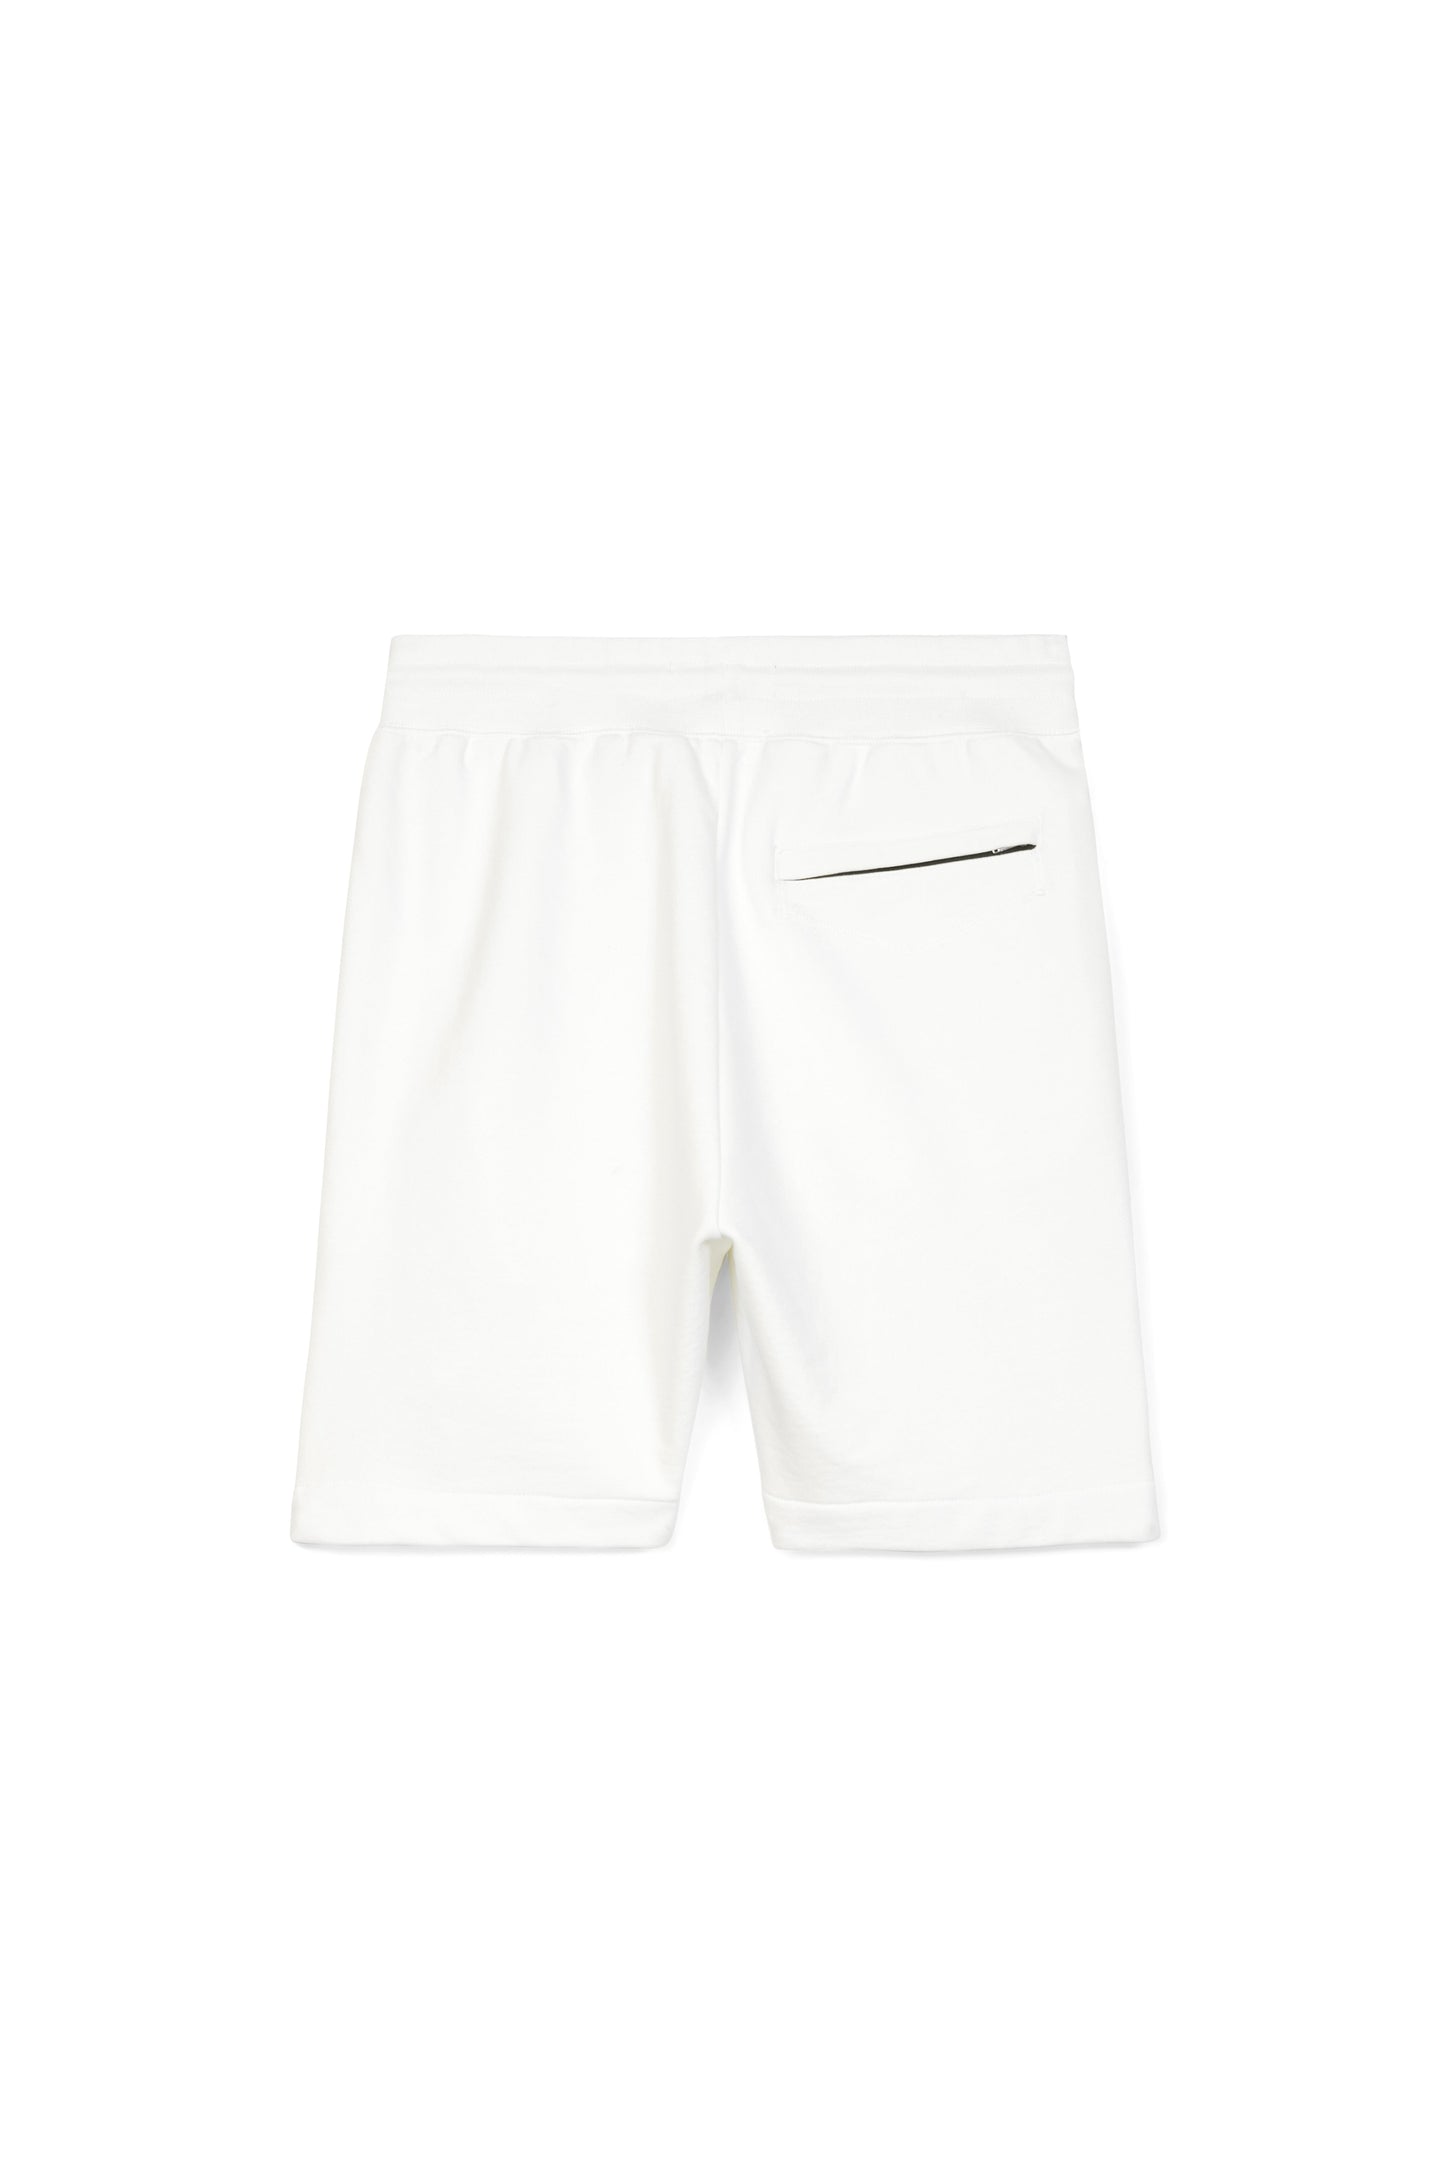 P413 RELAXED FIT SHORT - French Terry Wordmark Coconut Milk